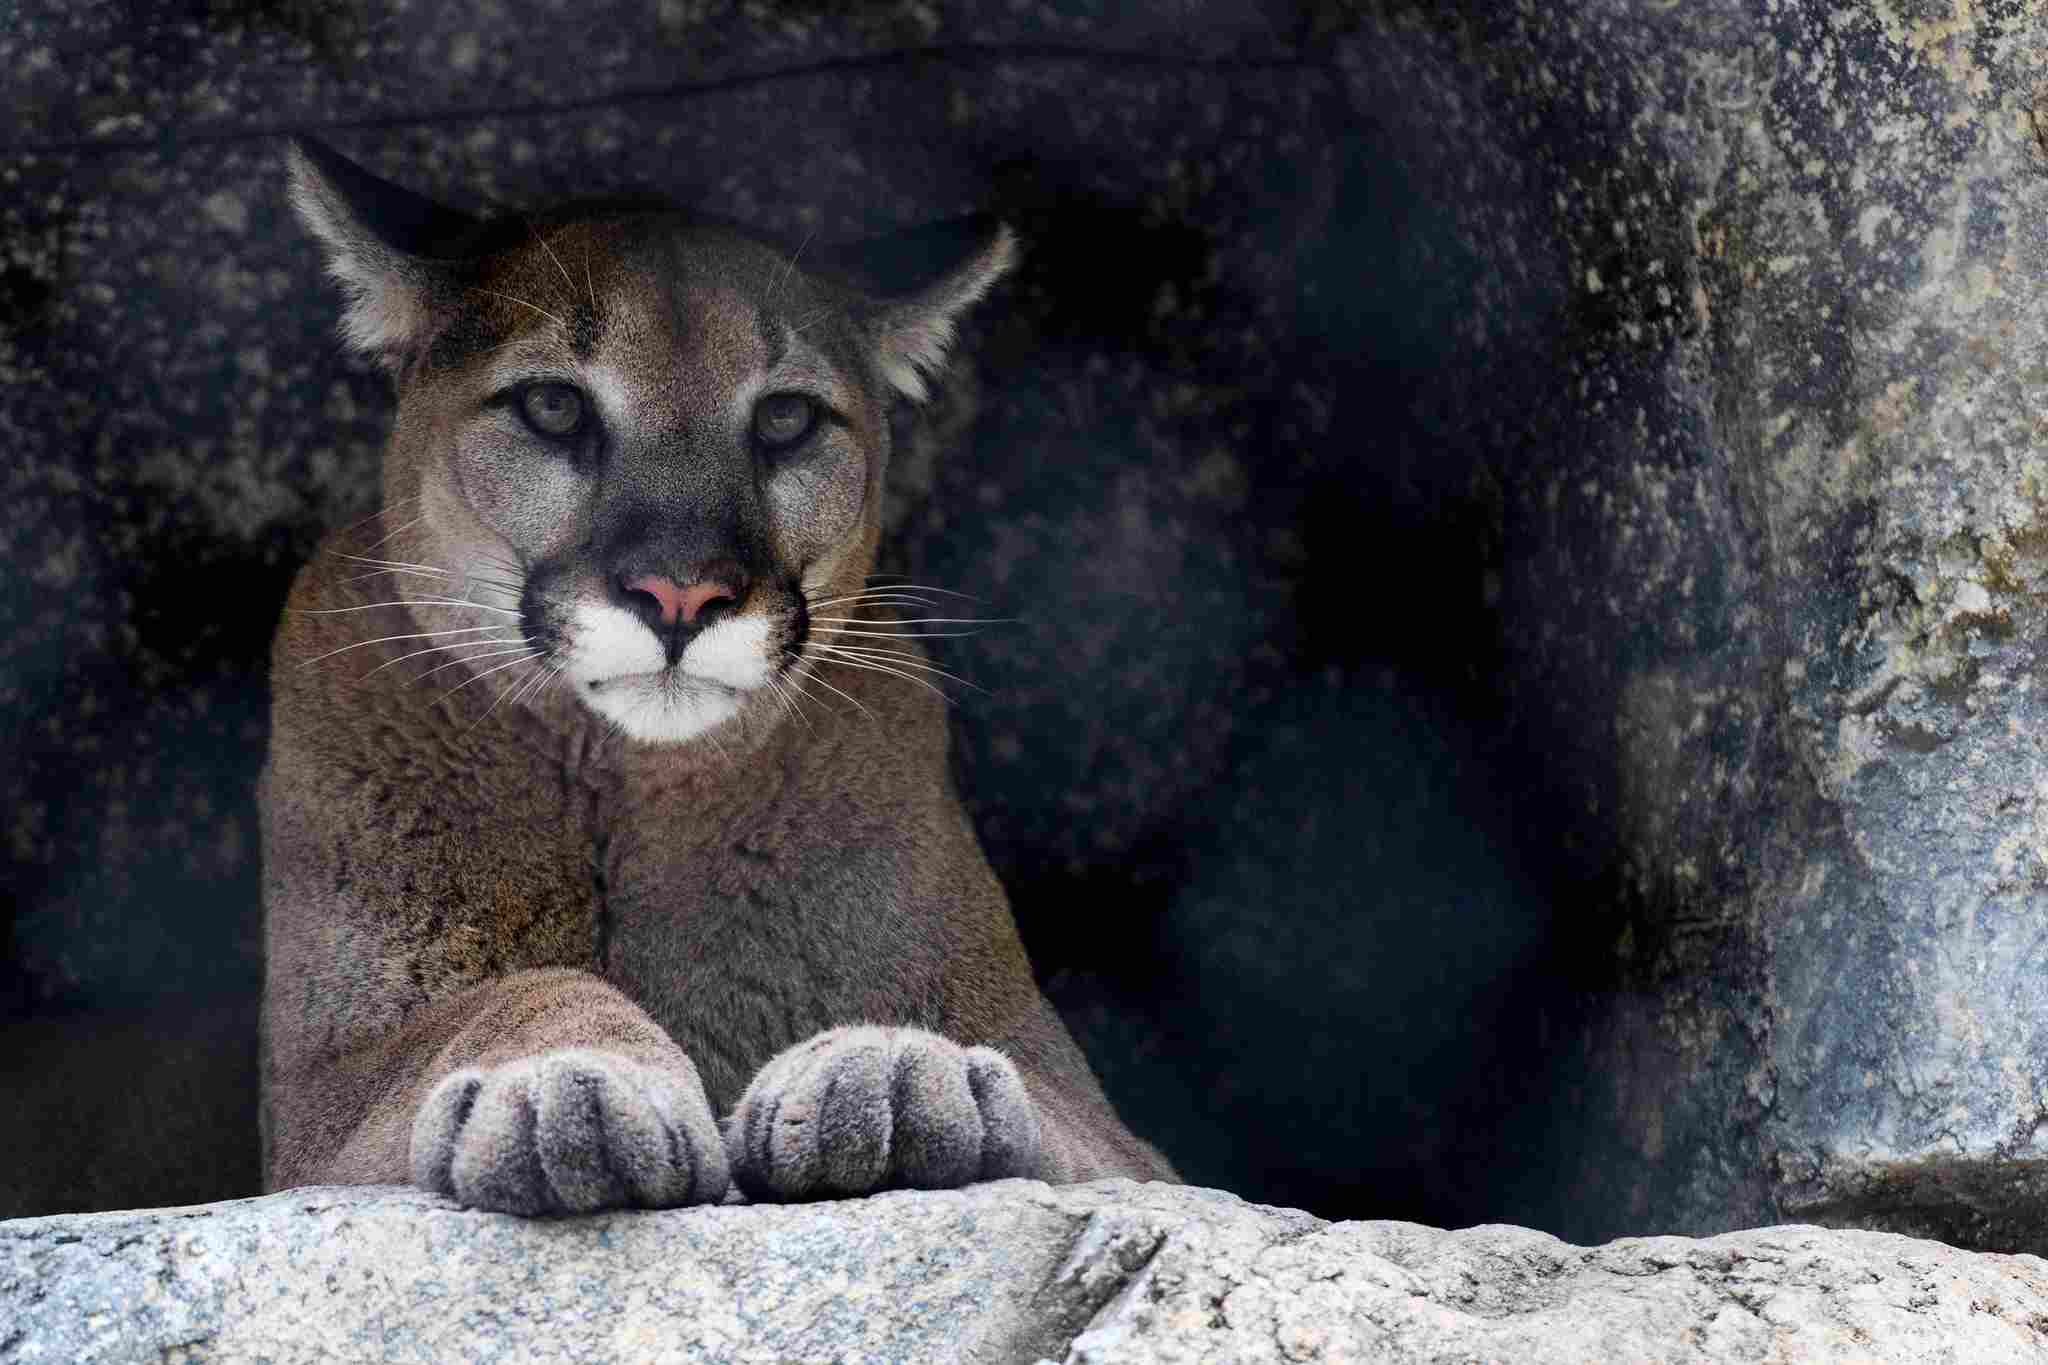 Wolf Vs Mountain Lion: In General, Mountain Lions are Elusive and Avoid Contact With Humans (Credit: Eric Kilby 2016, Uploaded Online 2017 .CC BY-SA 2.0.)